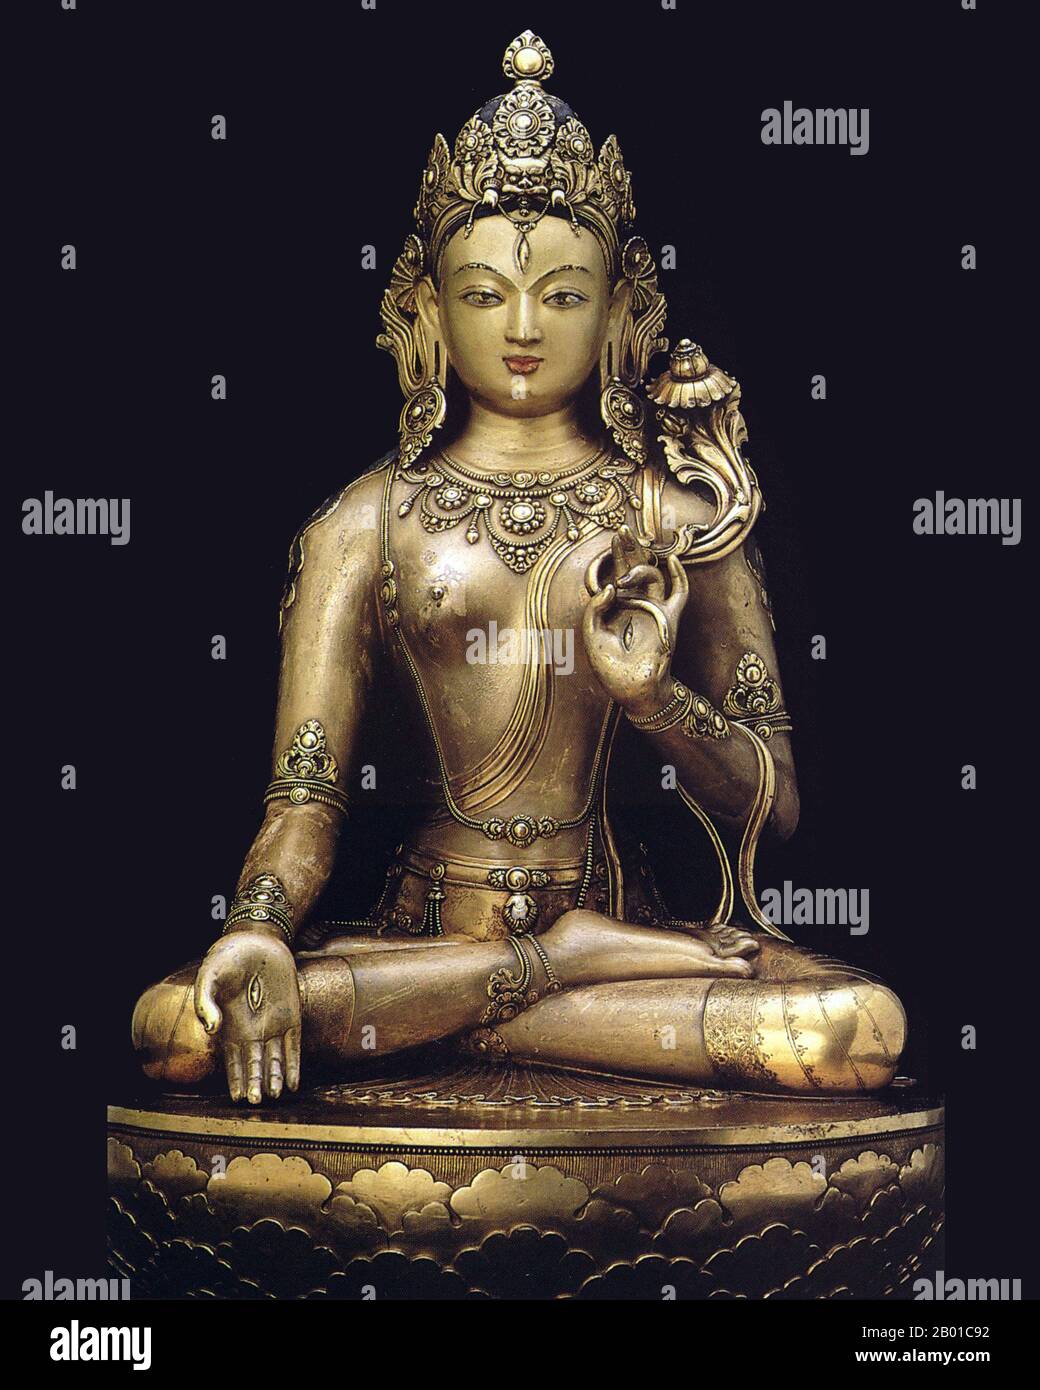 Mongolia: Gilt copper figurine of White Tara, 17th century.  Tara, also known as Jetsun Dolma (Tibetan: rje btsun sgrol ma) in Tibetan Buddhism, is a female Bodhisattva in Mahayana Buddhism who appears as a female Buddha in Vajrayana Buddhism. She is known as the 'mother of liberation', and represents the virtues of success in work and achievements. In Japan she is known as Tarani Bosatsu, and as Tuoluo in Chinese Buddhism.  Tara is a tantric meditation deity whose practice is used by practitioners of the Tibetan branch of Vajrayana Buddhism to develop certain inner qualities. Stock Photo